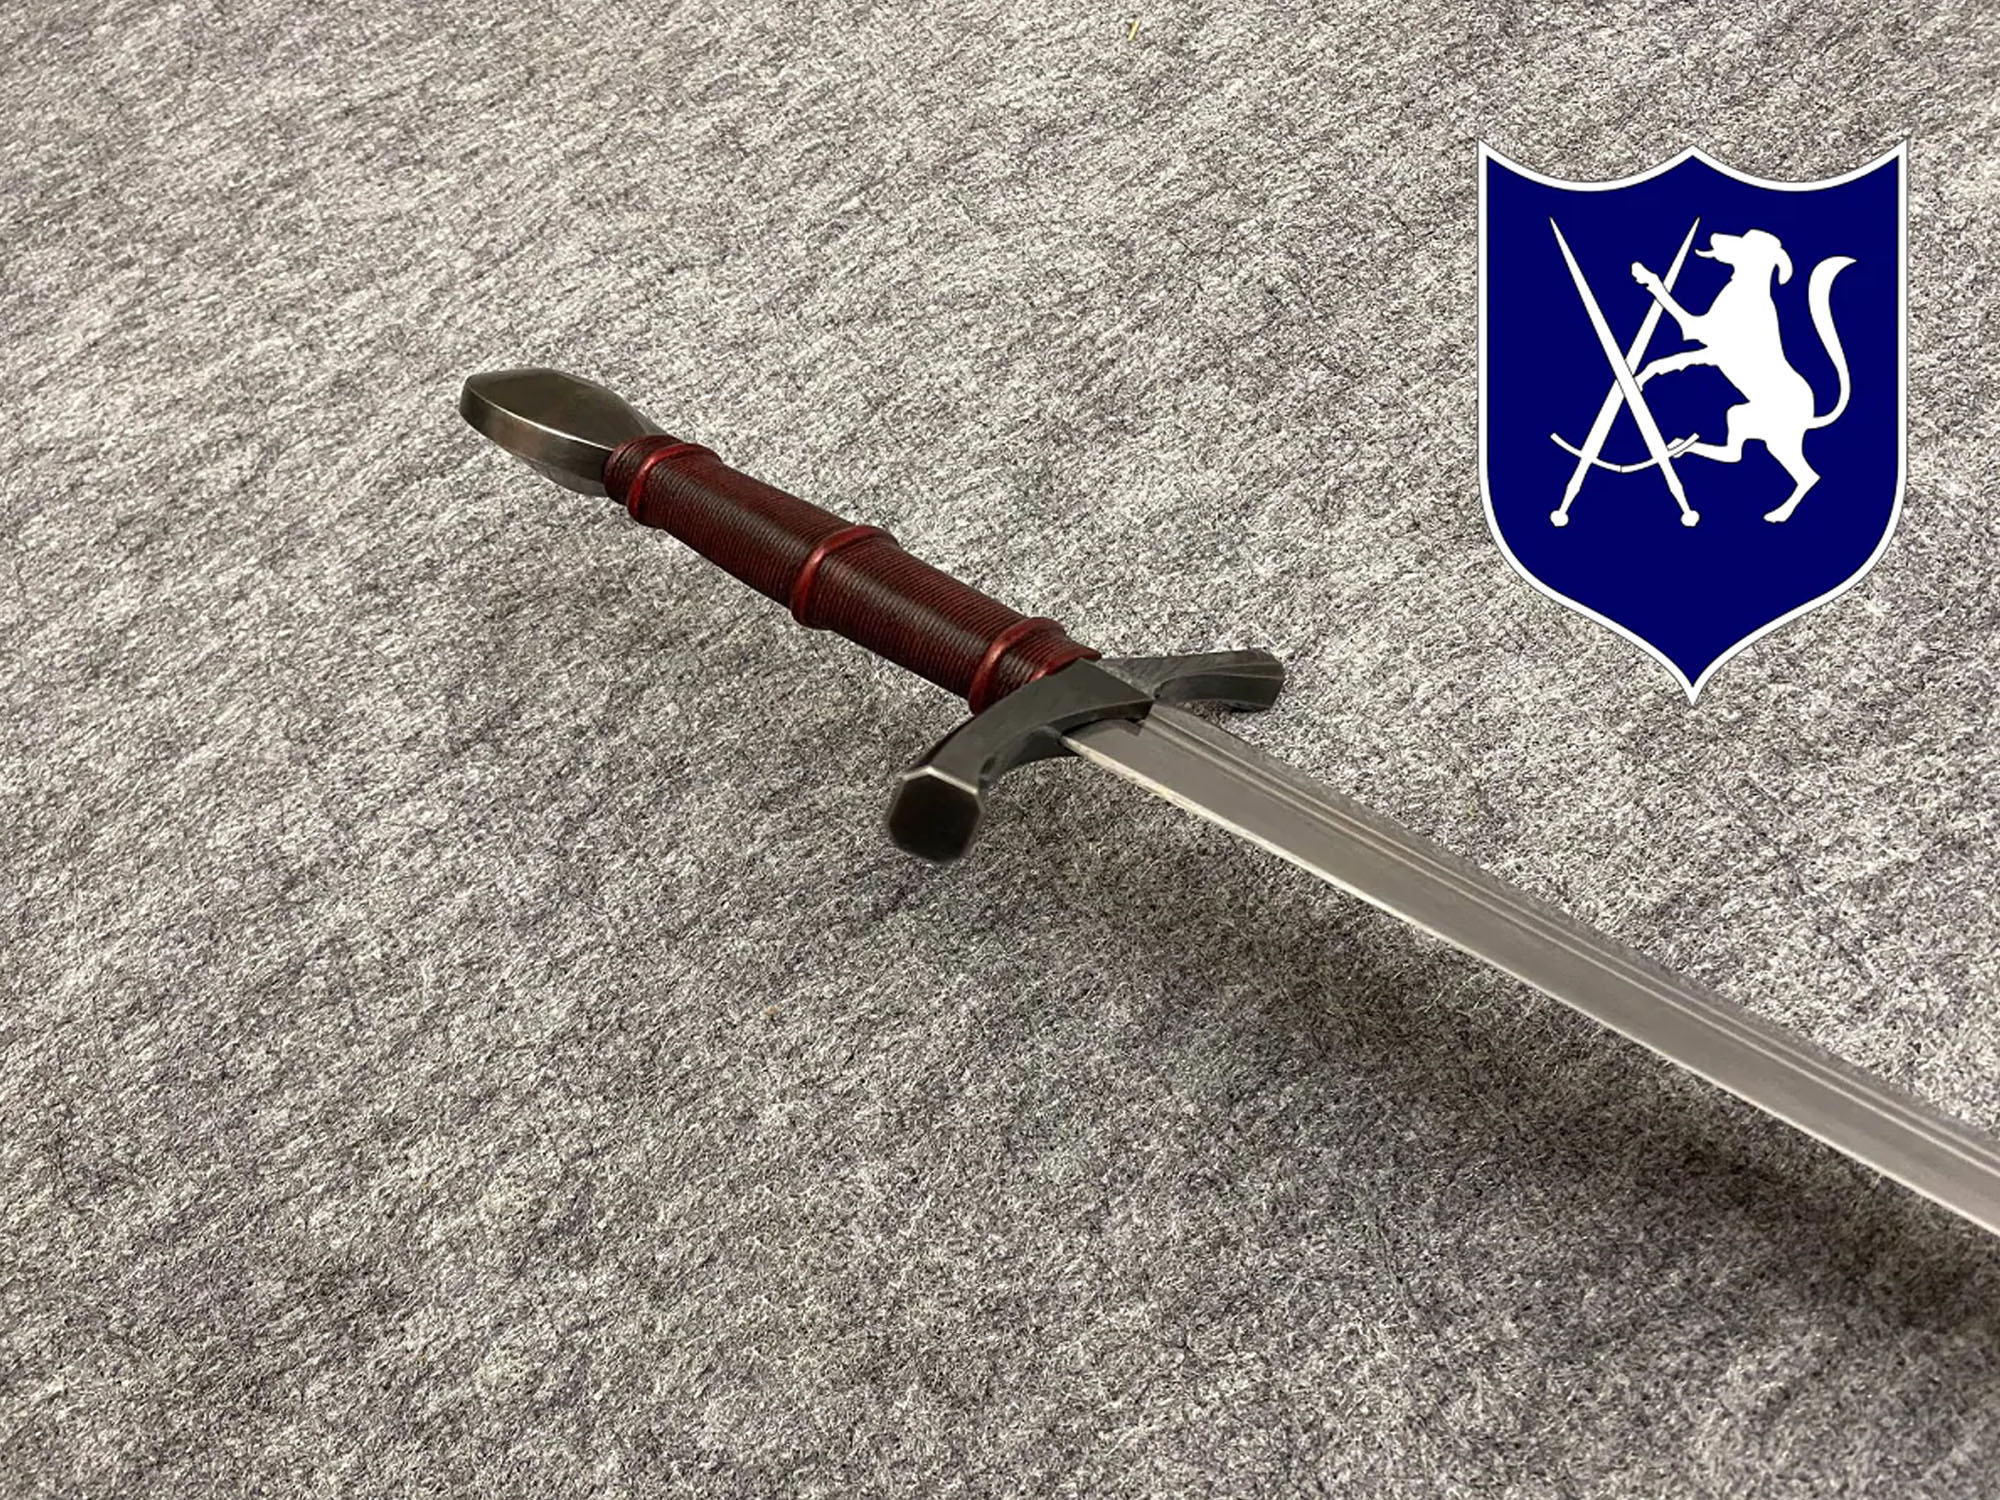 The Milan Sword, handforged and sharp blade